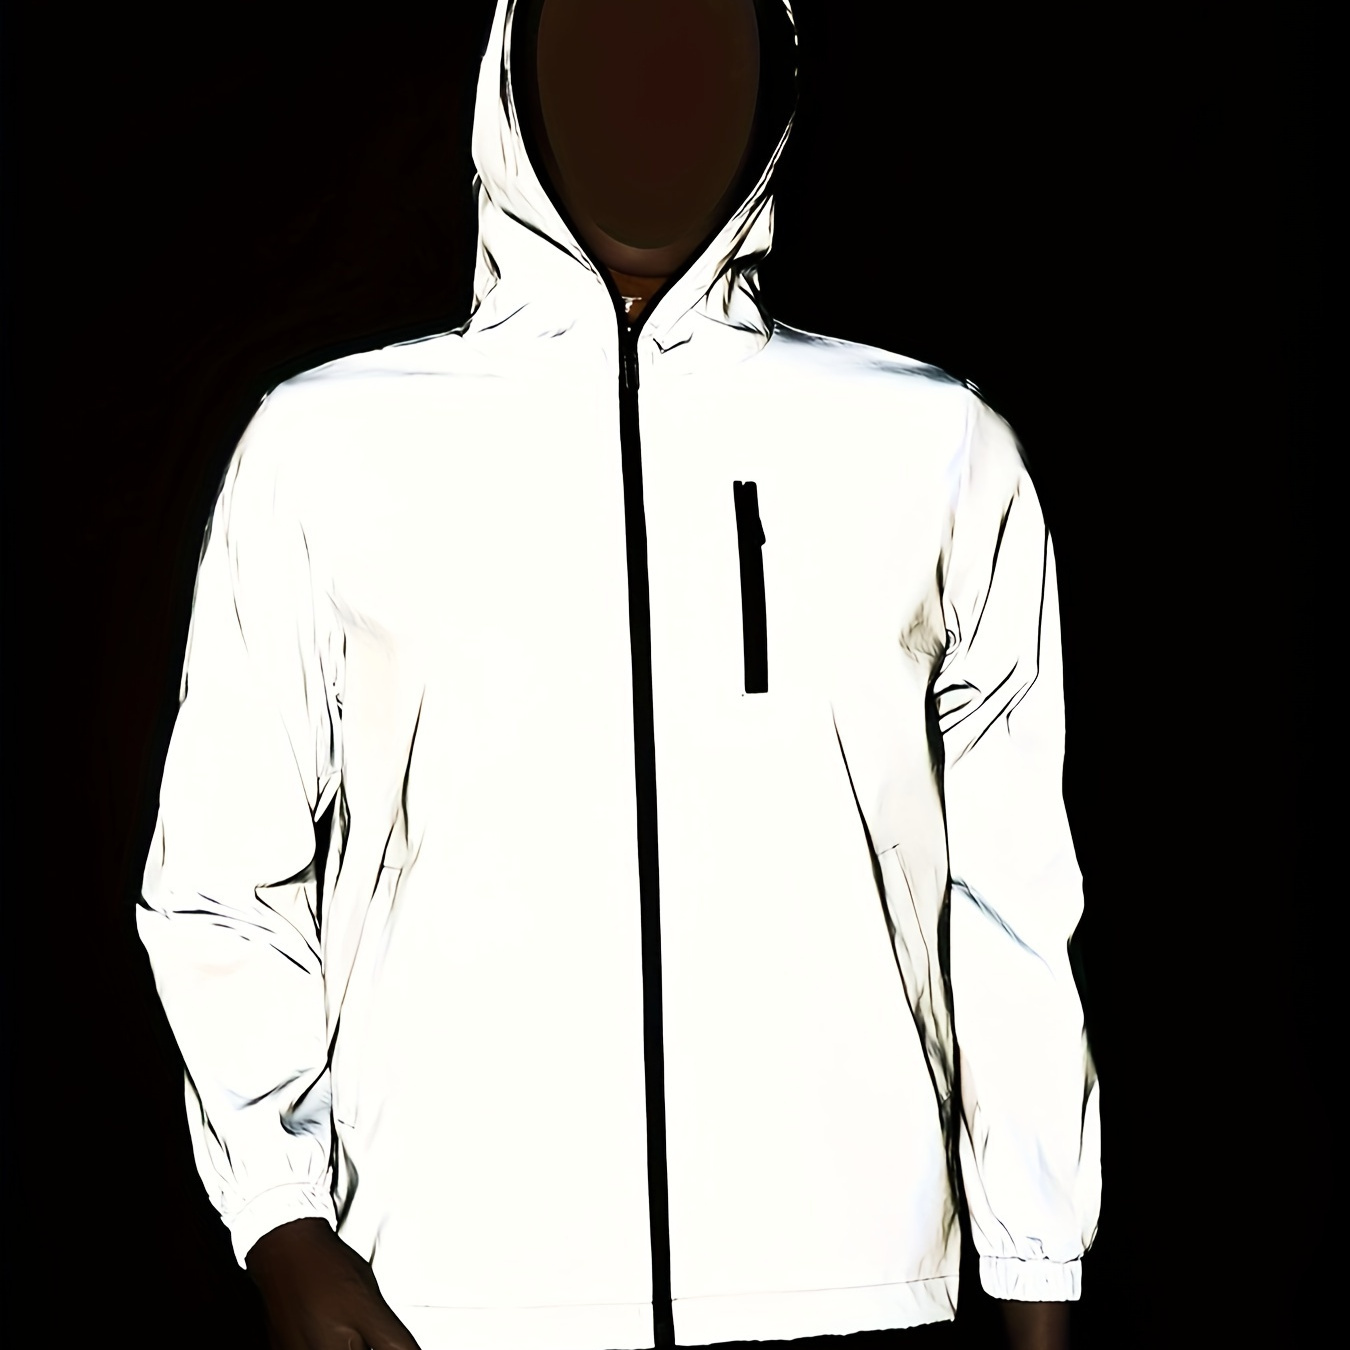 

Reflective Hooded Windbreaker Jacket For Men, Casual Design Lightweight Sports Jacket For Spring And Autumn Nighttime Running Wear And Outdoors Activities